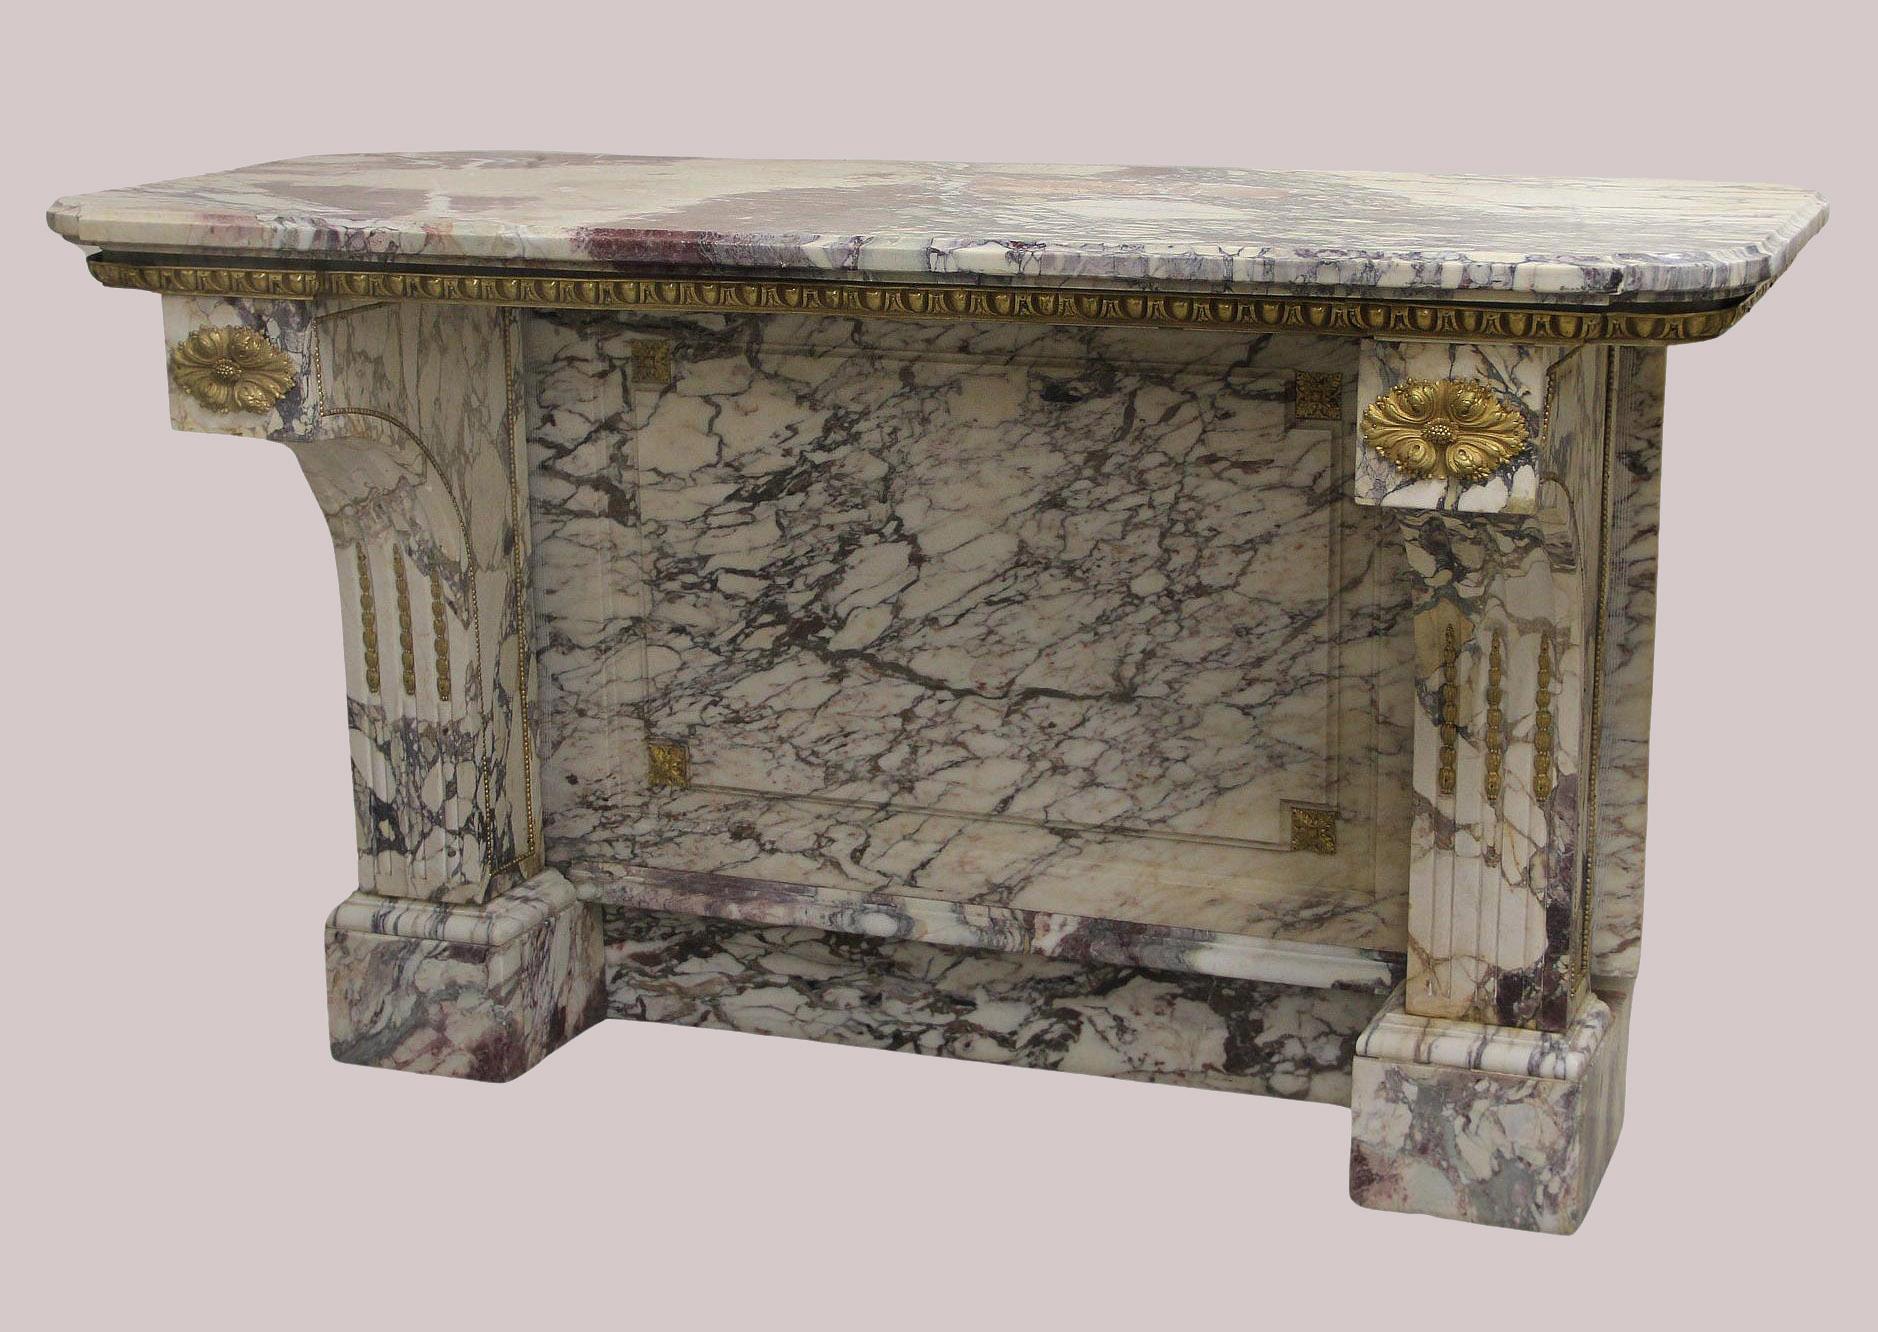 A Great Quality Late 19th Century Gilt Bronze Mounted Marble Console

The excellent brocatelle rouge shaped marble top above a gilt bronze frieze, hand carved mounted legs with the matching etched backsplash, and standing on rectangular bases.